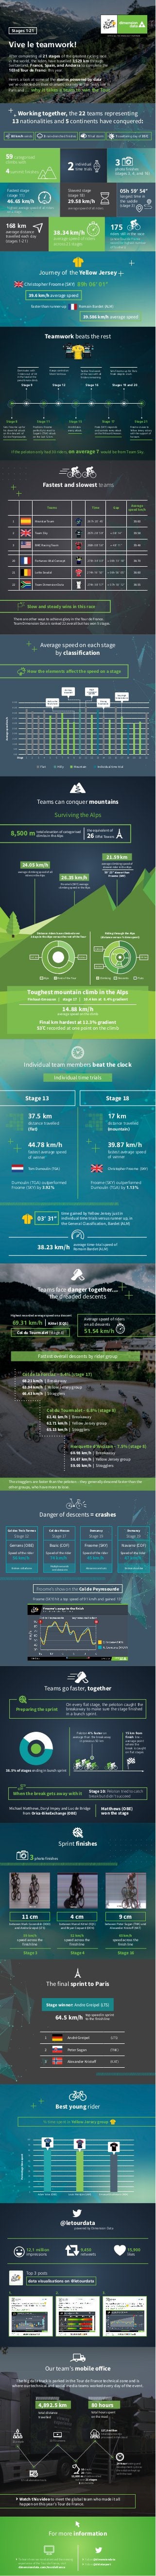 Vive le teamwork!
After completing all 21 stages of the greatest cycling race
in the world, the riders have travelled 3,529 km through
Switzerland, France, Spain, and Andorra to complete the
103rd Tour de France this year.
Here’s a look at some of the stories powered by data
we’ve collected on their dramatic journey to the finish line in
Paris and … why it takes a team to win the Tour.
Stages 1-21
Individual team members beat the clock
Journey of the Yellow Jersey
Our team’s mobile office
The big data truck is parked in the Tour de France technical zone and is
where our technical and social media teams worked every day of the event.
Teams can conquer mountains
Surviving the Alps
average climbing speed of all
riders in the Alps
Froome’s (SKY) average
climbing speed in the Alps
average climbing speed of
slowest rider in the Alps
59’ 23” slower than
Froome (SKY)
Working together, the 22 teams representing
13 nationalities and 5 continents have conquered:
Slowest stage
(stage 18)
29.58 km/h
Fastest stage
(stage 11)
46.65 km/h
highest average speed of all riders
on a stage
average speed of all riders
Teamwork beats the rest
Average speed on each stage
by classification
8,500 m total elevation of categorised
climbs in the Alps
24.05 km/h
26.35 km/h
21.59 km
Stage 13 Stage 18
Froome (SKY) outperformed
Dumoulin (TGA) by 1.13%
39.87 km/h
17 km
fastest average speed
of winner
distance travelled
(mountain)
Christopher Froome (SKY)
37.5 km
44.78 km/h
distance travelled
(flat)
Dumoulin (TGA) outperformed
Froome (SKY) by 3.92%
fastest average speed
of winner
Tom Dumoulin (TGA)
38.23 km/h
average time-trial speed of
Romain Bardet (ALM)
Teams face danger together…
the dreaded descents
The stragglers are faster than the peloton – they generally descend faster than the
other groups, who have more to lose.
Danger of descents = crashes
Teams go faster, together
Michael Matthews, Daryl Impey and Luc de Bridge
from Orica-BikeExchange (OBE)
Matthews (OBE)
won the stage
Sprint finishes
The final sprint to Paris
3photo finishes
Best young rider
@letourdata
powered by Dimension Data
Top 3 posts
data visualisations on @letourdata
3.1. 2.
12,1 million
impressions
15,900
likes
9,450
retweets
For more information
Watch this video to meet the global team who made it all
happen on this year’s Tour de France.
How the elements affect the speed on a stage
38.5% of stages ending in bunch sprint
Peloton 4% faster on
average than the breakaway
in previous 50 km
15 km from
finish 	line –
average point
where the
break is caught
on flat stages
total distance
travelled
total hours spent
on the road
4,892.5 km 80 hours
22 people
12 collaboration tools
10 TV screens
10 desks
20 chairs
12,600 m of cables rolled
out over 21 stages
1 kitchenette
127,8 million
total data records
processed in the cloud
24-hour testing and
development cycle so
the solution kept up
with the race
1 hail storm3 rain-drenched finishes80 km/h winds 1 sweltering day of 35˚C
175
riders still in the race
(a new Tour de France
record for highest number
of finishers)
38.34 km/h 
average speed of riders
across 21 stages
39.6 km/h average speed
39.586 km/h average speed
faster than runner-up
Christopher Froome (SKY) 89h 06’ 01’’
Romain Bardet (ALM)
Fastest and slowest teams
There are other ways to achieve glory in the Tour de France.
Team Dimension Data is ranked 22 overall but has won 5 stages.
Slow and steady wins in this race
Teams Time Gap
Average
speed km/h
1 Movistar Team 267h 20’ 45’ 39.60
2 Team Sky 267h 28’ 59’’ + 08’ 14’’ 39.58
3 BMC Racing Team 268h 08’ 56’’ + 48’ 11’’ 39.48
20 Fortuneo-Vital Concept 273h 34’ 03’’ + 06h 13’ 18’’ 38.70
21 Lotto Soudal 274h 16' 50'' + 06h 56’ 05’’ 38.60
22 Team Dimension Data 274h 38’ 57’’ + 07h 18’ 12’’ 38.55
Distance riders have climbed over
3 days in the Alps versus the rest of the Tour
03’ 31”
time gained by Yellow Jersey just in
individual time trials versus runner up, in
the General Classification, Bardet (ALM)
Froome’s show on the Col de Peyresourde
% time spent in Yellow Jersey group
Preparing the sprint
On every flat stage, the peloton caught the
breakaway to make sure the stage finished
in a bunch sprint.
When the break gets away with it Stage 10: Peloton tried to catch
break but didn’t succeed
Averagespeedkm/h
Stage 14 16 17 18 19 20 21
20.00
25.00
30.00
35.00
40.00
45.00
50.00
15.00
10.00
5.00
0.00
1 2 3 4 5 6 1512 137 8
Flat Hilly Mountain Individual time trial
9 10 11
Hail on the
final climb
43.5 km
downhill
Strong
headwinds
High
crosswind
speeds
Very high
temperaturesVery high
temperatures
the equivalent of
26Eiffel Towers
11 cm
59 km/h
speed across the
finish line
between Mark Cavendish (DDD)
and Andre Greipel (LTS)
Stage 3
4 cm
52 km/h
speed across the
finish line
between Marcel Kittel (EQS)
and Bryan Coquard (DEN)
Stage 4
9 cm
65 km/h
speed across the
finish line
between Peter Sagan (TNK) and
Alexander Kristoff (KAT)
Stage 16
If the peloton only had 30 riders, on average 7 would be from Team Sky.
Stage 8
Sets Froome up for
his downhill attack
on the descent of
Col de Peyresourde.
Stage 9
Dominates with
7 riders out of 34
in the lead at the
penultimate climb.
Stage 12
Keeps control on
Mont Ventoux.
Stage 16
Tackles final week
of the race with all
9 riders remaining.
Stage 11
Positions Froome
perfectly to react to
Sagan’s (TNK) attack
on the last 12 km.
Stage 17
Poels (SKY) responds
and controls every attack
on the Finhaut-Emosson.
Stage 15
Annihilates
every attack.
Stage 21
Froome cruises to
Yellow Jersey victory
with the support of
his team.
Stages 19 and 20
Sets Froome up for Paris
finalé despite crash.
14.88 km/h
average speed on the climb
Toughest mountain climb in the Alps
Finhaut-Emosson | stage 17 | 10.4 km at 8.4% gradient
Final km hardest at 12.3% gradient
53 C recorded at one point on the climb˚
Individual time trials
Stage 12
Gerrans (OBE)
Speed of the rider
56 km/h
Broken collarbone
Col des Trois Termes
Stage 17
Bozic (COF)
Speed of the rider
74 km/h
Multiple wounds
and abrasions
Col des Mosses
Stage 19
Froome (SKY)
Speed of the rider
45 km/h
Abrasions and cuts
Domancy
Stage 19
Navarro (COF)
Speed of the rider
47 km/h
Broken shoulder
Domancy
Alps Rest of the Tour
267 km 118 km
Highest recorded average speed on a descent
69.31 km/h Kittel (EQS)
Col du Tourmalet (stage 8) 51.54 km/h
Average speed of riders
on all descents  
Fastest overall descents by rider group
Col de la Forclaz – 5.4% (stage 17)  
68.21 km/h | Breakaway
63.94 km/h | Yellow Jersey group
66.43 km/h | Stragglers
Horquette d’Ancizan – 7.5% (stage 8)  
60.98 km/h | Breakaway
58.67 km/h | Yellow Jersey group
59.05 km/h | Stragglers
Col du Tourmalet – 6.8% (stage 8)  
62.41 km/h | Breakaway
62.71 km/h | Yellow Jersey group
65.15 km/h | Stragglers
Adam Yates (OBE) Emanuel Buchmann (BOA)Louis Meintjies (LAM)
Percentagetimespent
40
50
60
70
80
90
100
30
20
10
0
To learn how we revolutionised the viewing
experience of the Tour de France, visit
dimensiondata.com/tourdefrance
Follow @dimensiondata
Follow @didatasport
59 categorised
climbs with
4summit finishes
3photo finishes
(stages 3, 4, and 16)
individual
time trials
05h 59’ 54’’
longest time in
the saddle
(stage 3)
168 km
average distance
travelled each day
(stages 1-21)
Froome (SKY) hit a top speed of 91 km/h and gained 13"
Riding through the Alps
(distance versus % time spent)
Climbing FlatsDescents
118 km
106 km
270 km
55%
12%
33%
Stage winner: Andre Greipel (LTS)
64.5 km/h
top speed in sprint
to the finish line
1 André Greipel (LTS)
2 Peter Sagan (TNK)
3 Alexander Kristoff (KAT)
 